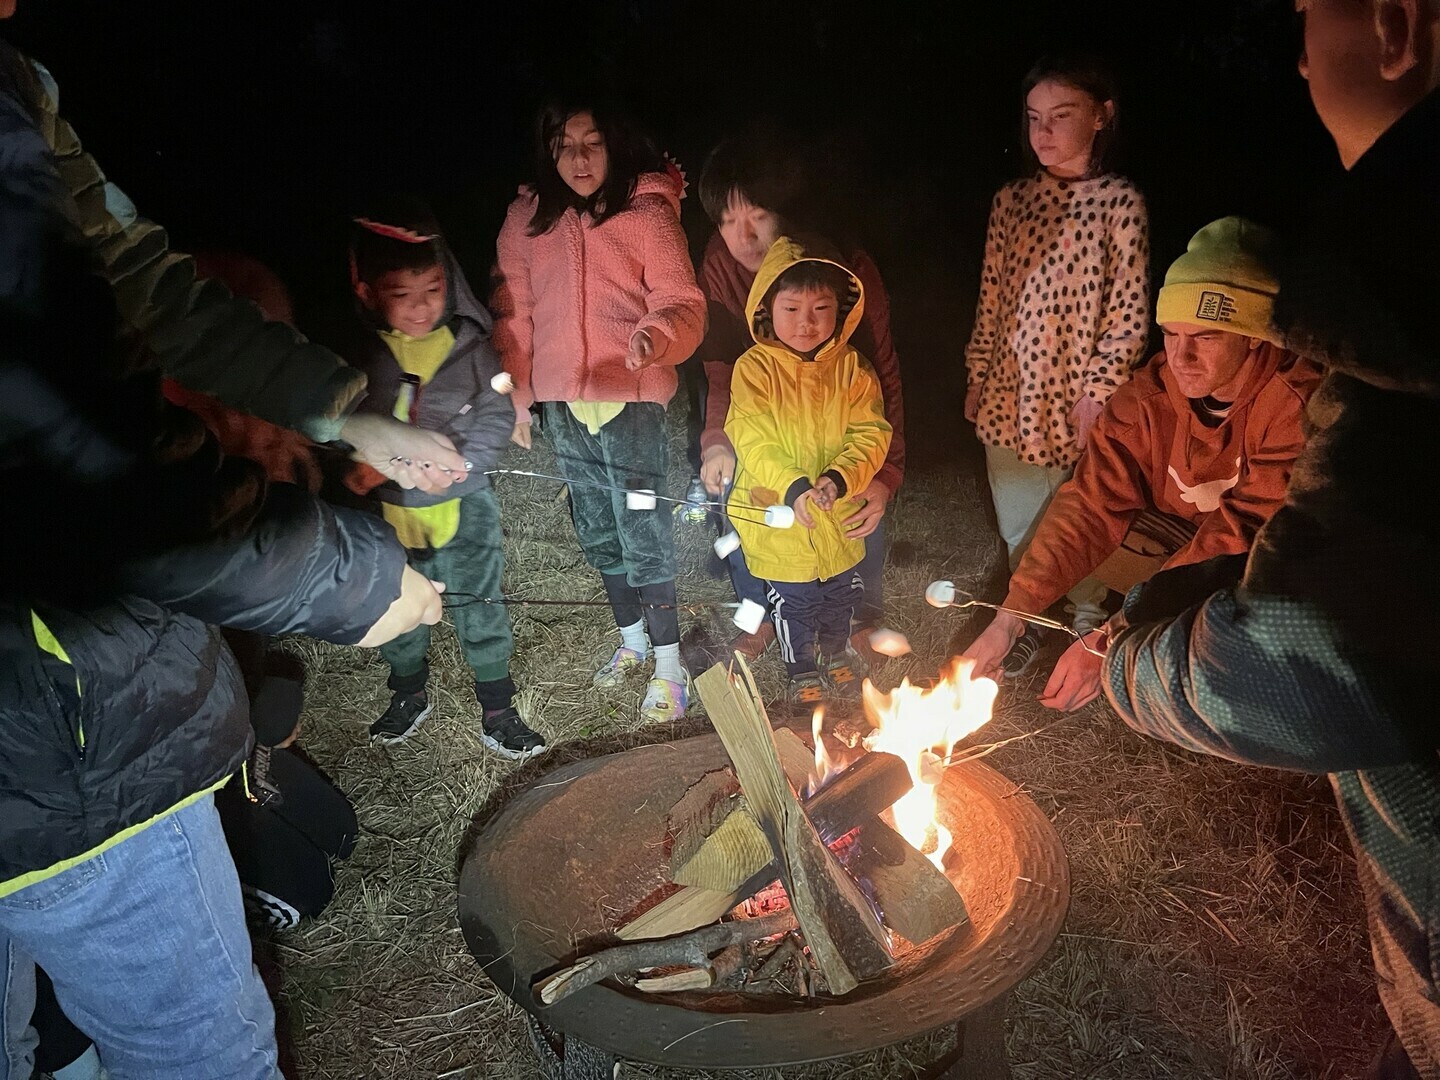 Family Campout, McKinney, Texas, United States